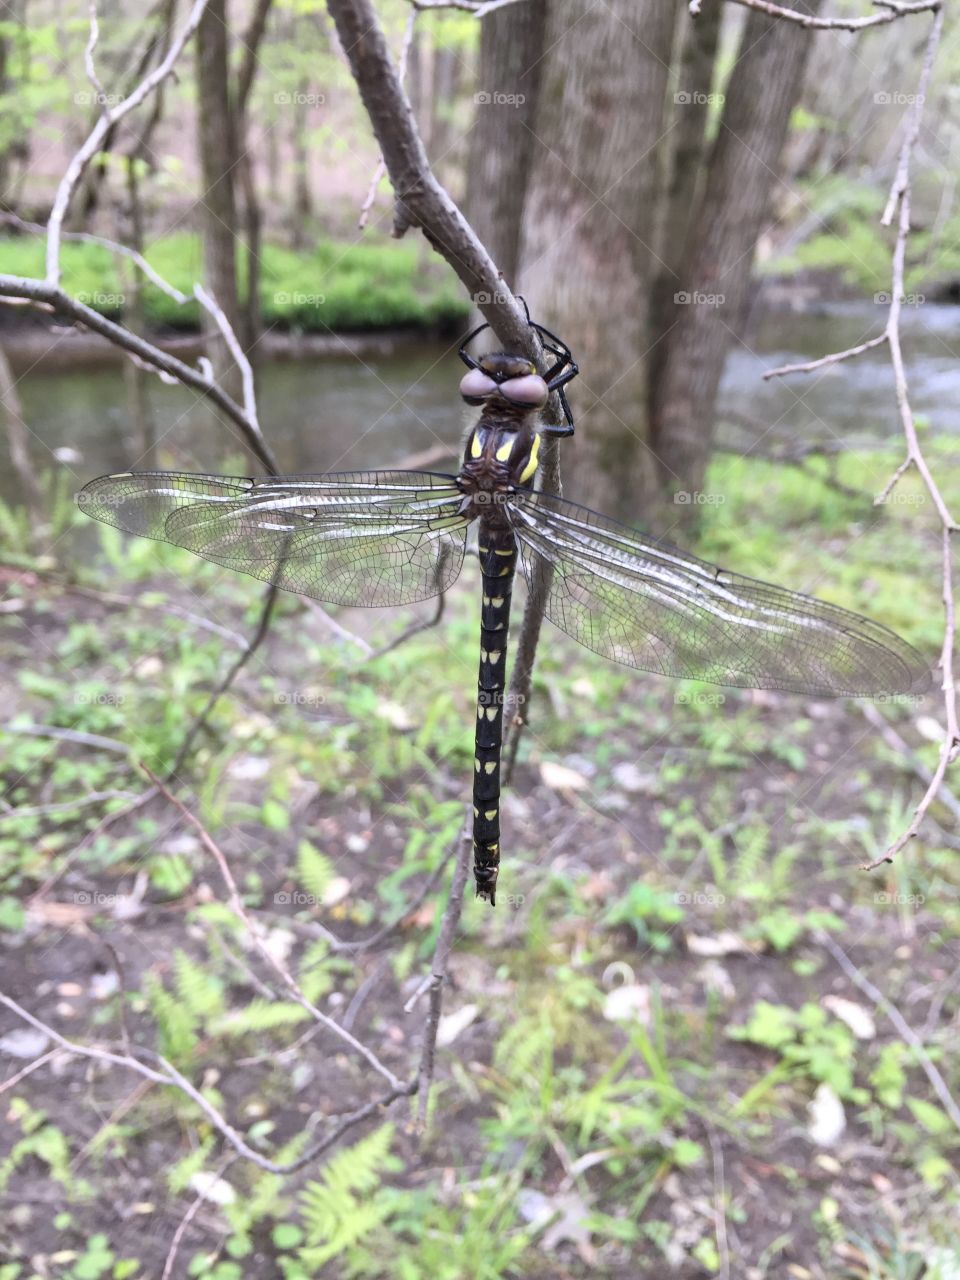 Newly Hatched Dragonfly